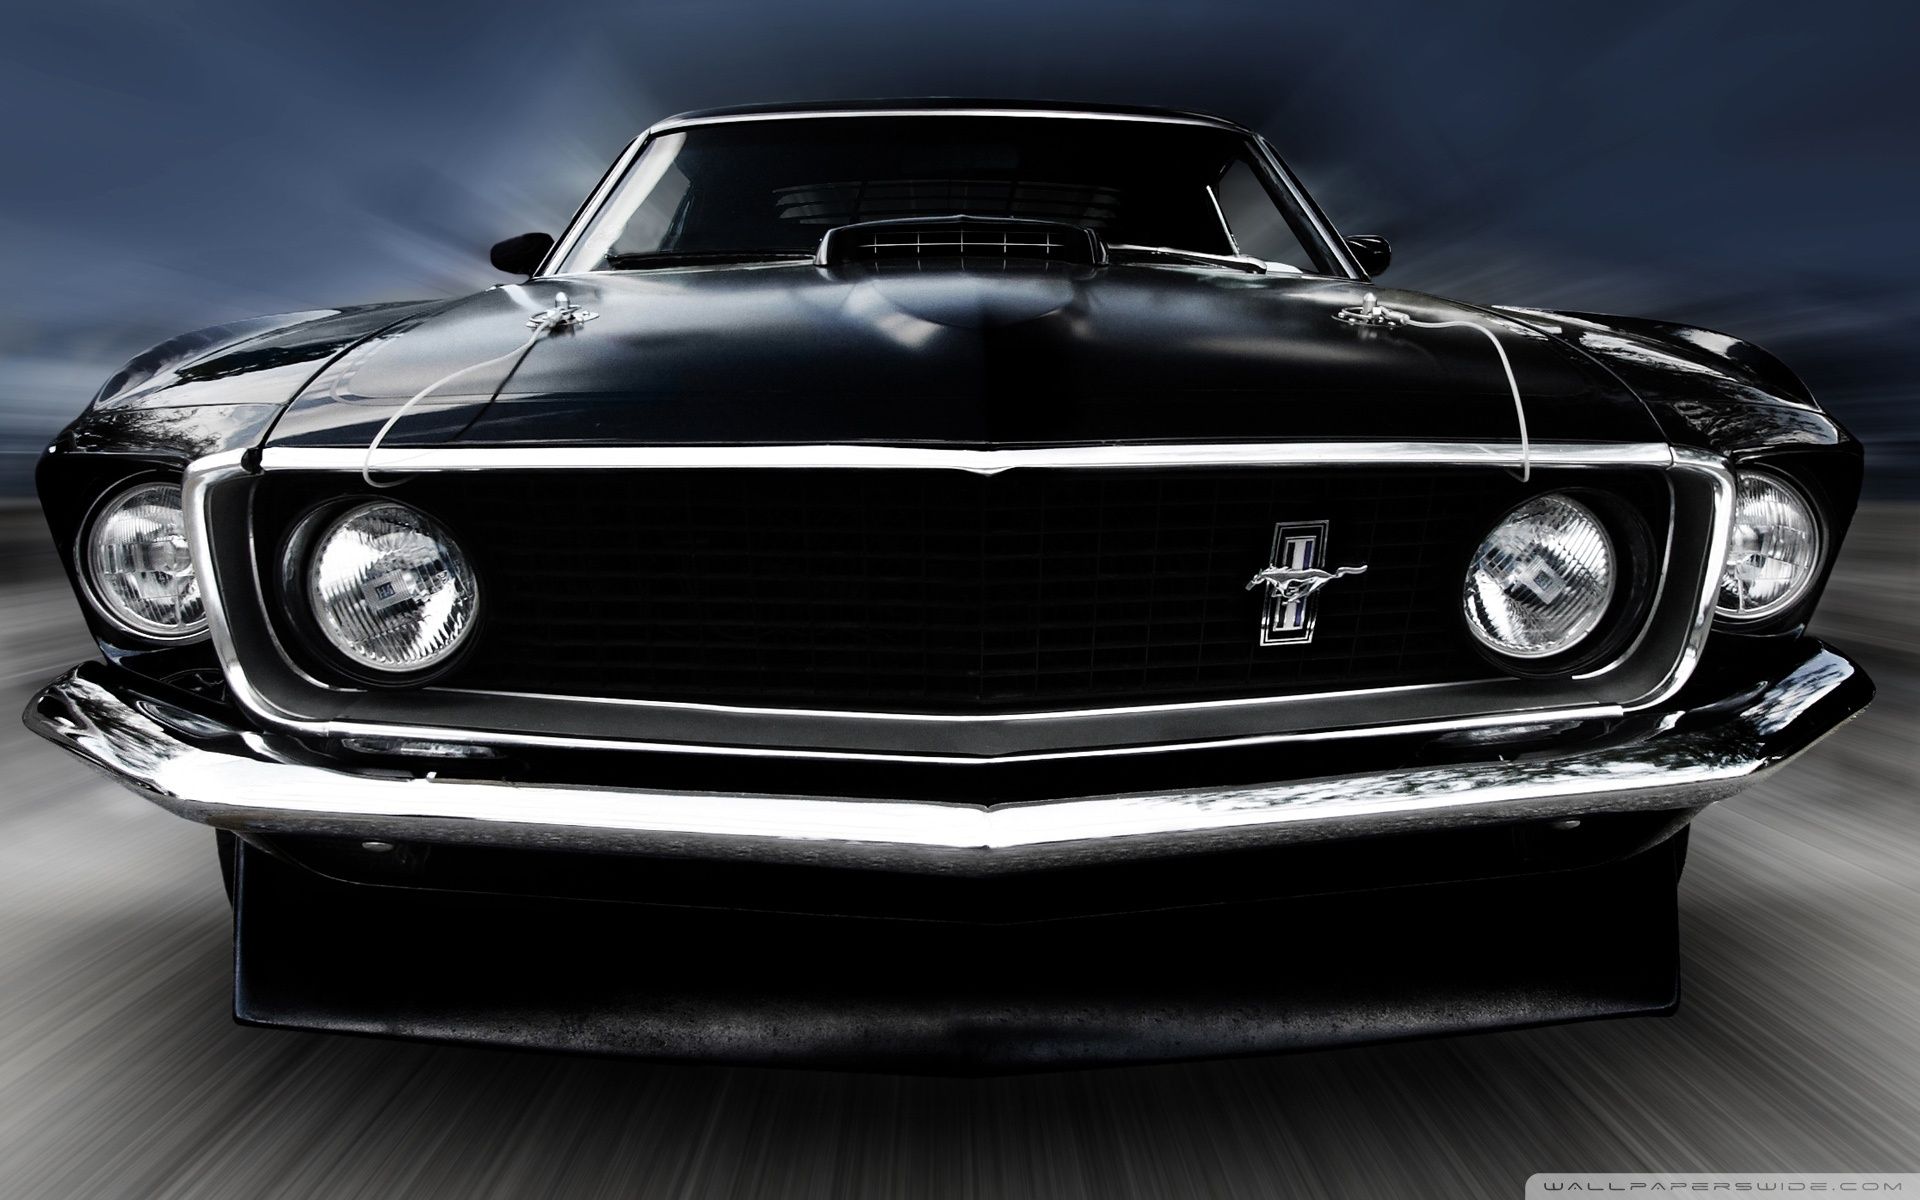 Ford Mustang Wallpapers Hd Backgrounds